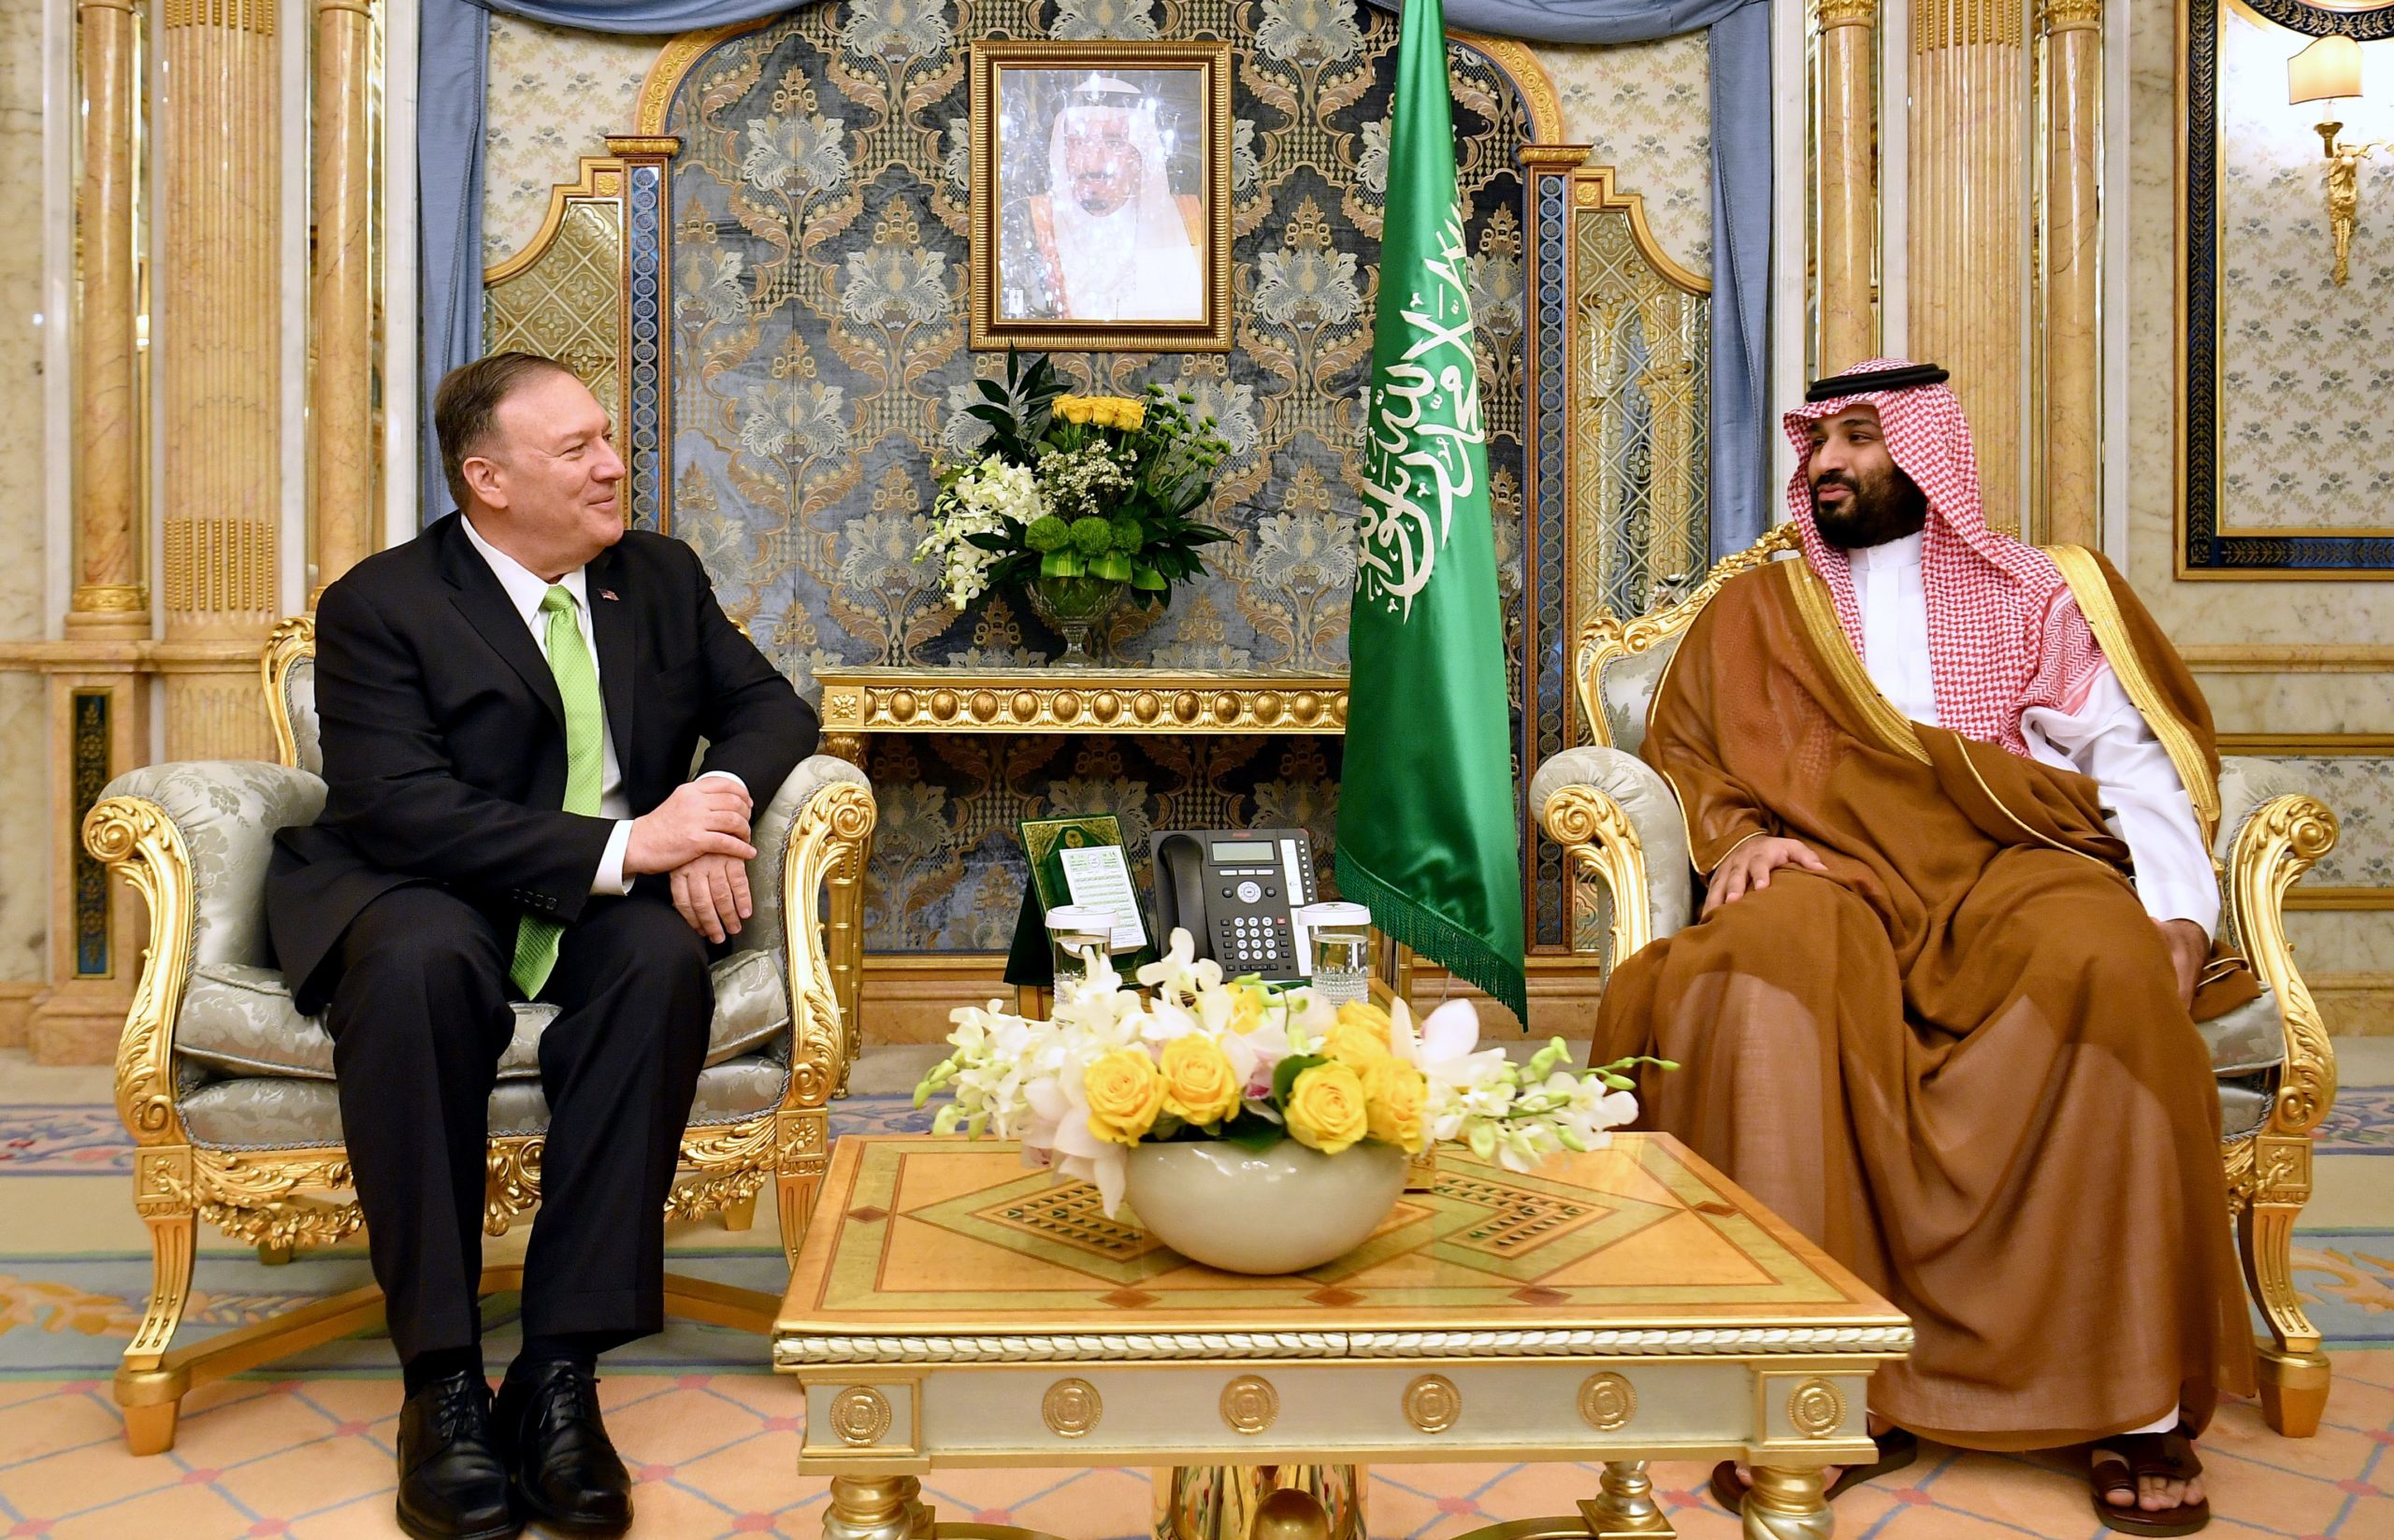 Pompeo and the Prince